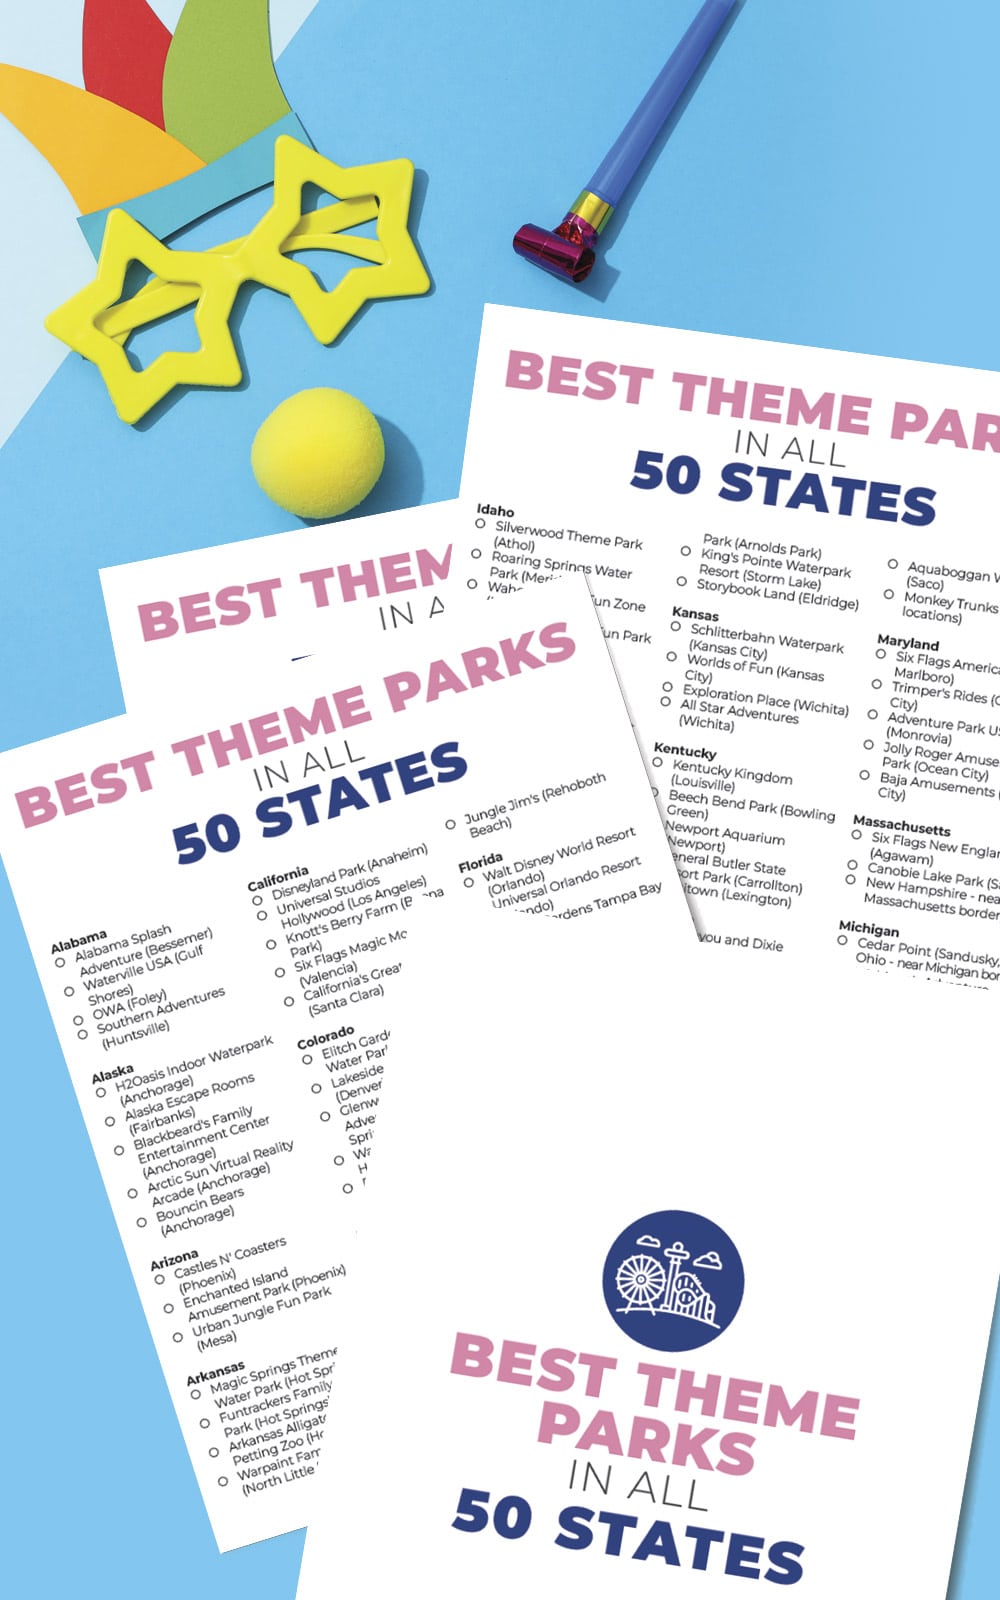 Best Theme Parks in All 50 States (Printable)